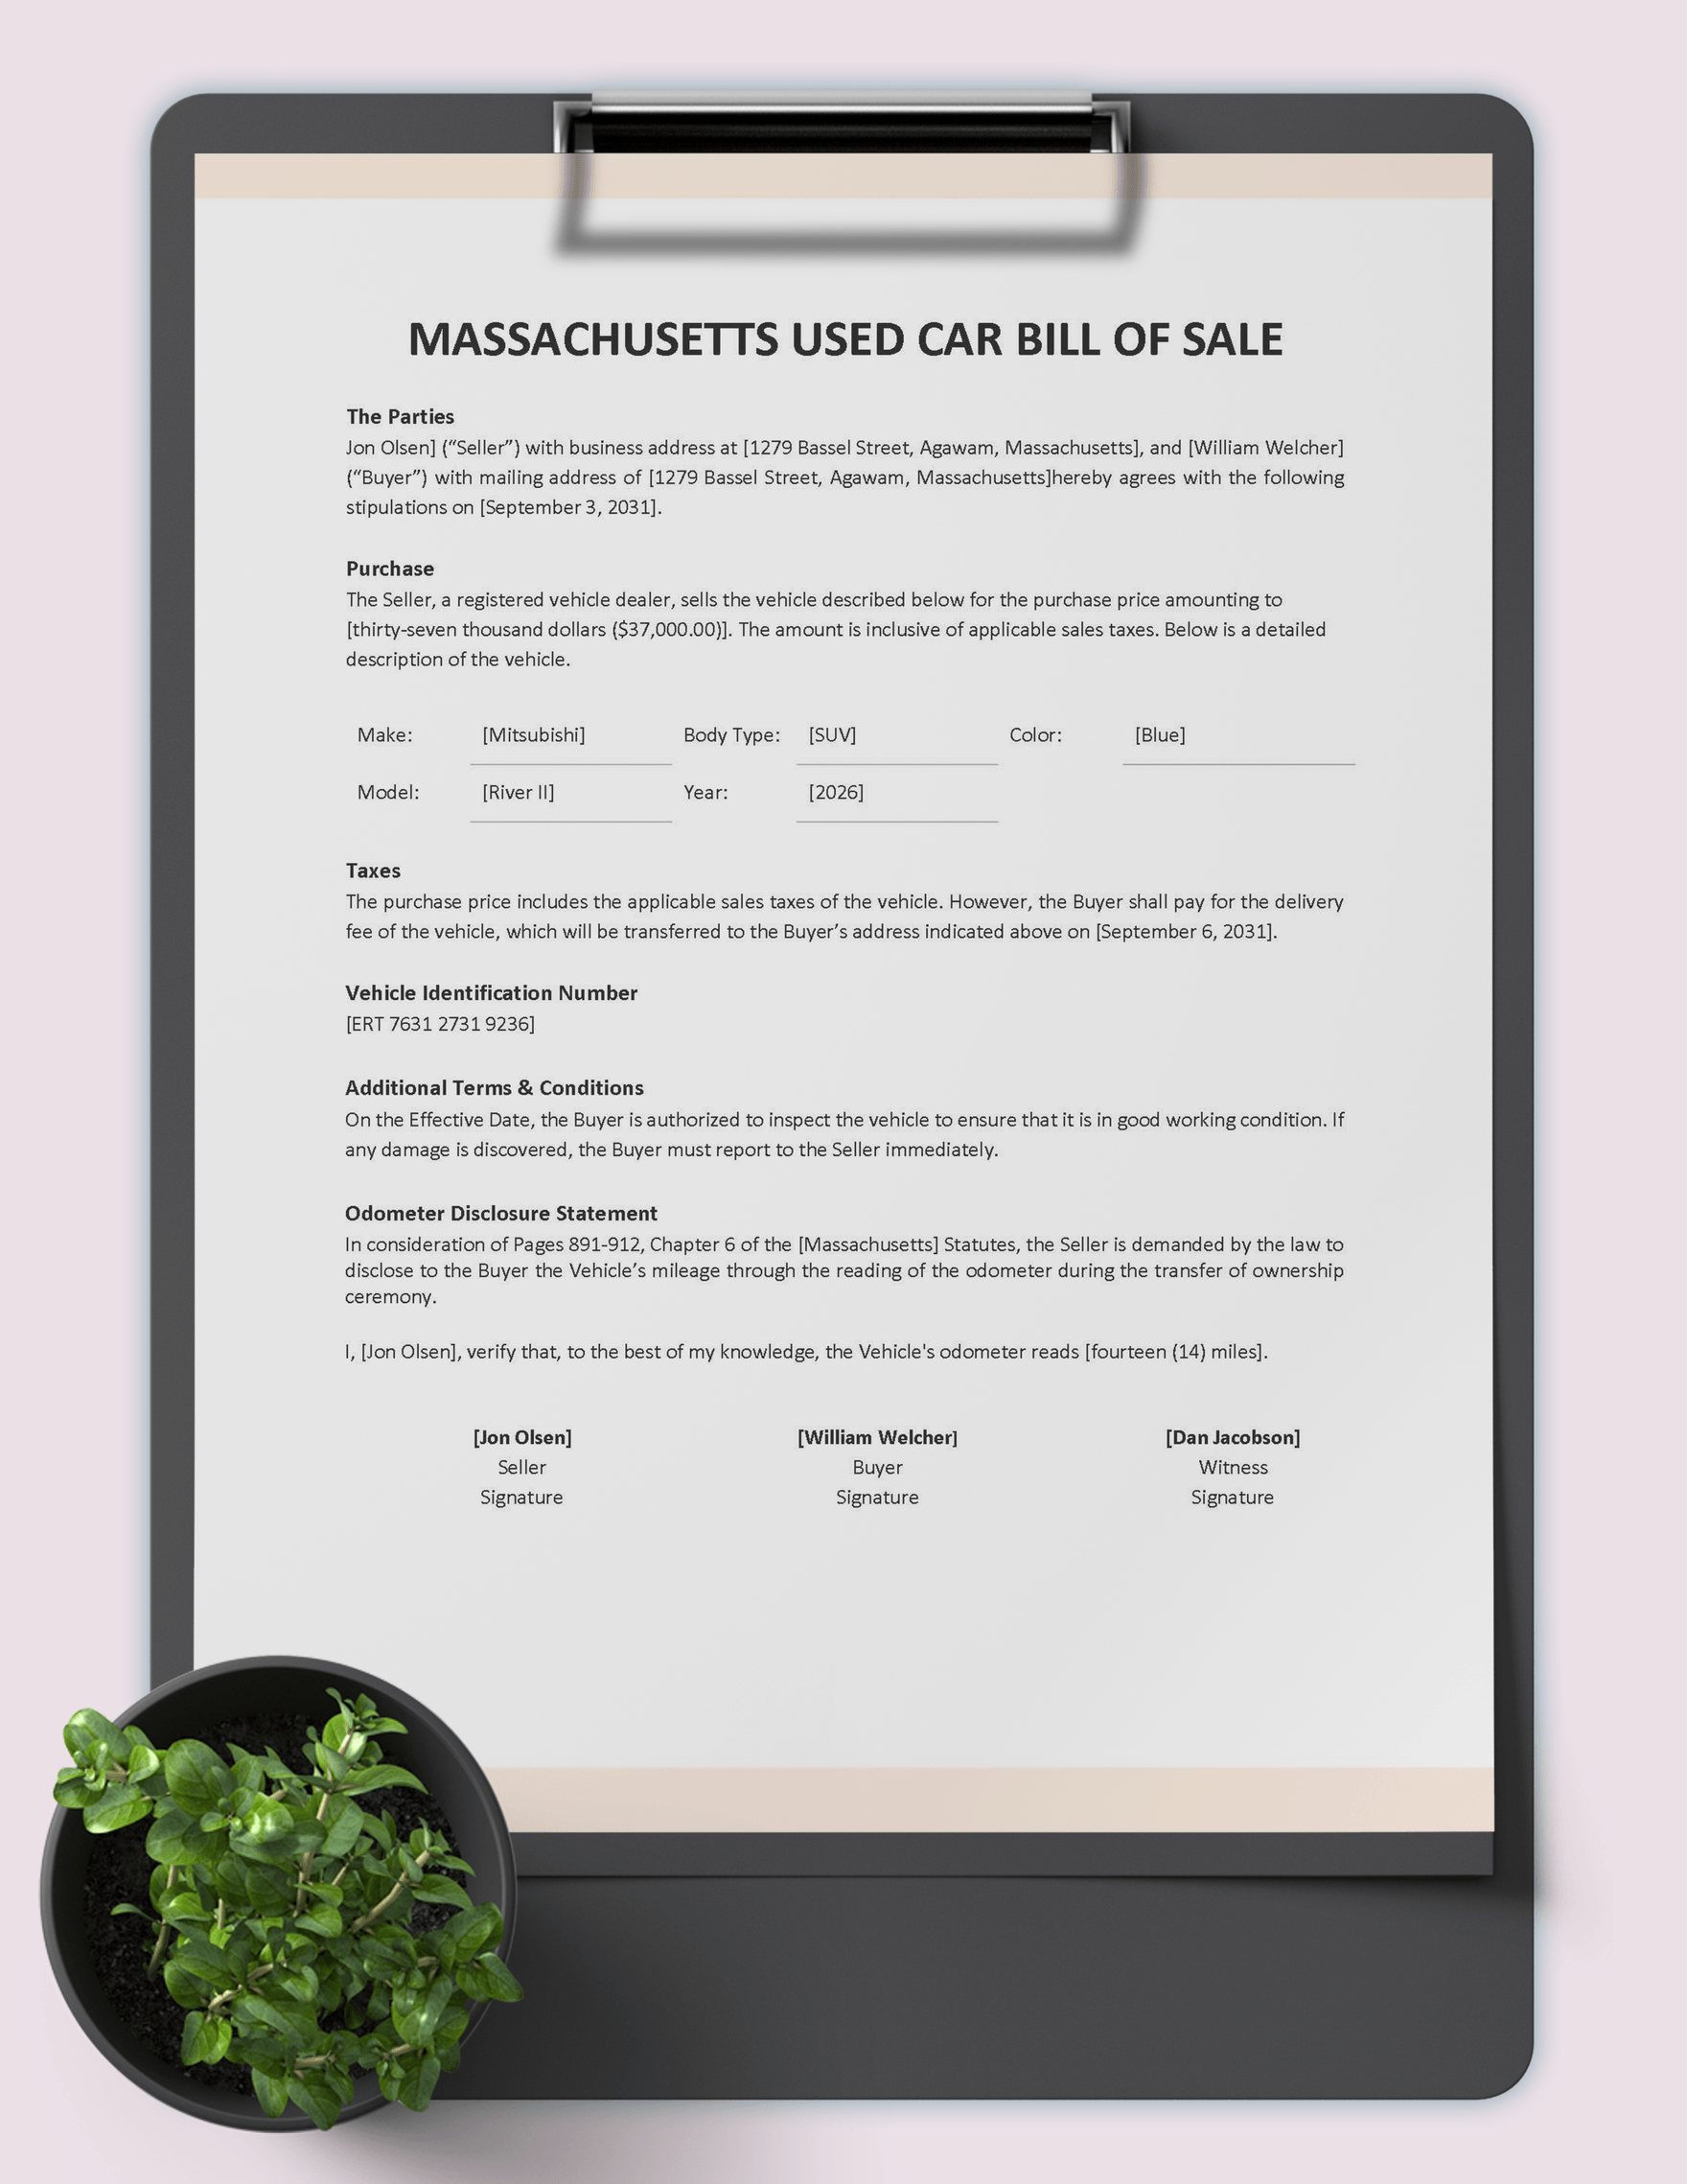 Massachusetts Used Car Bill of Sale Form Template